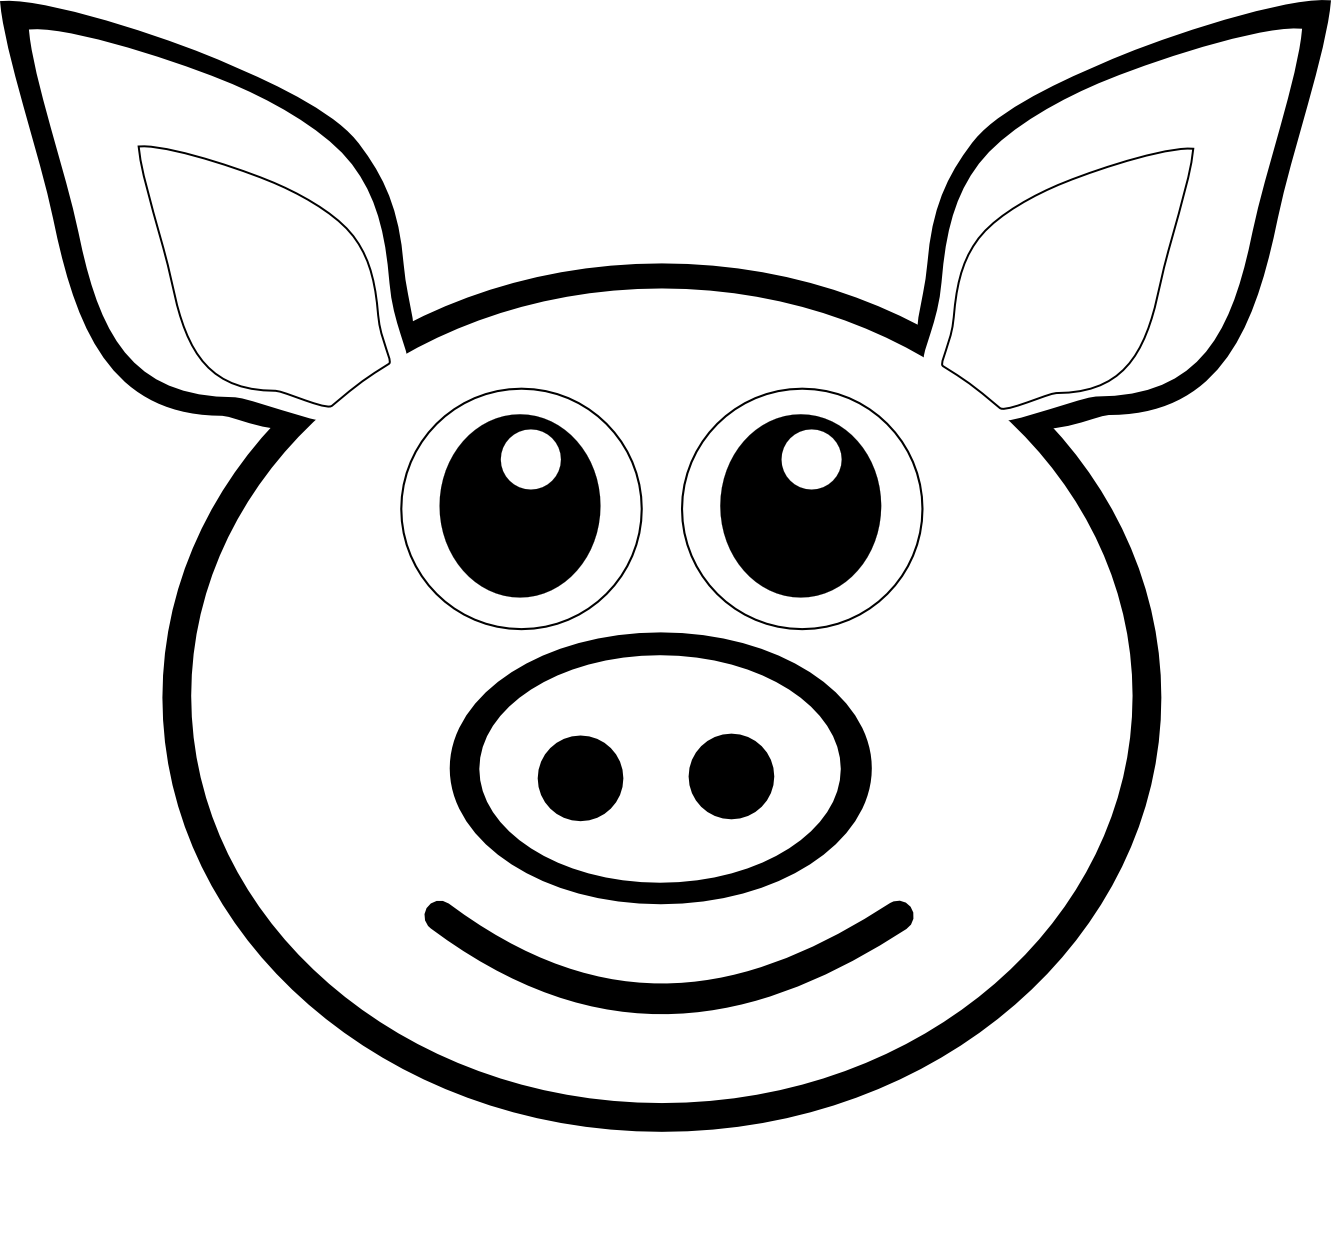 Pig Clipart Black And White - ClipArt Best